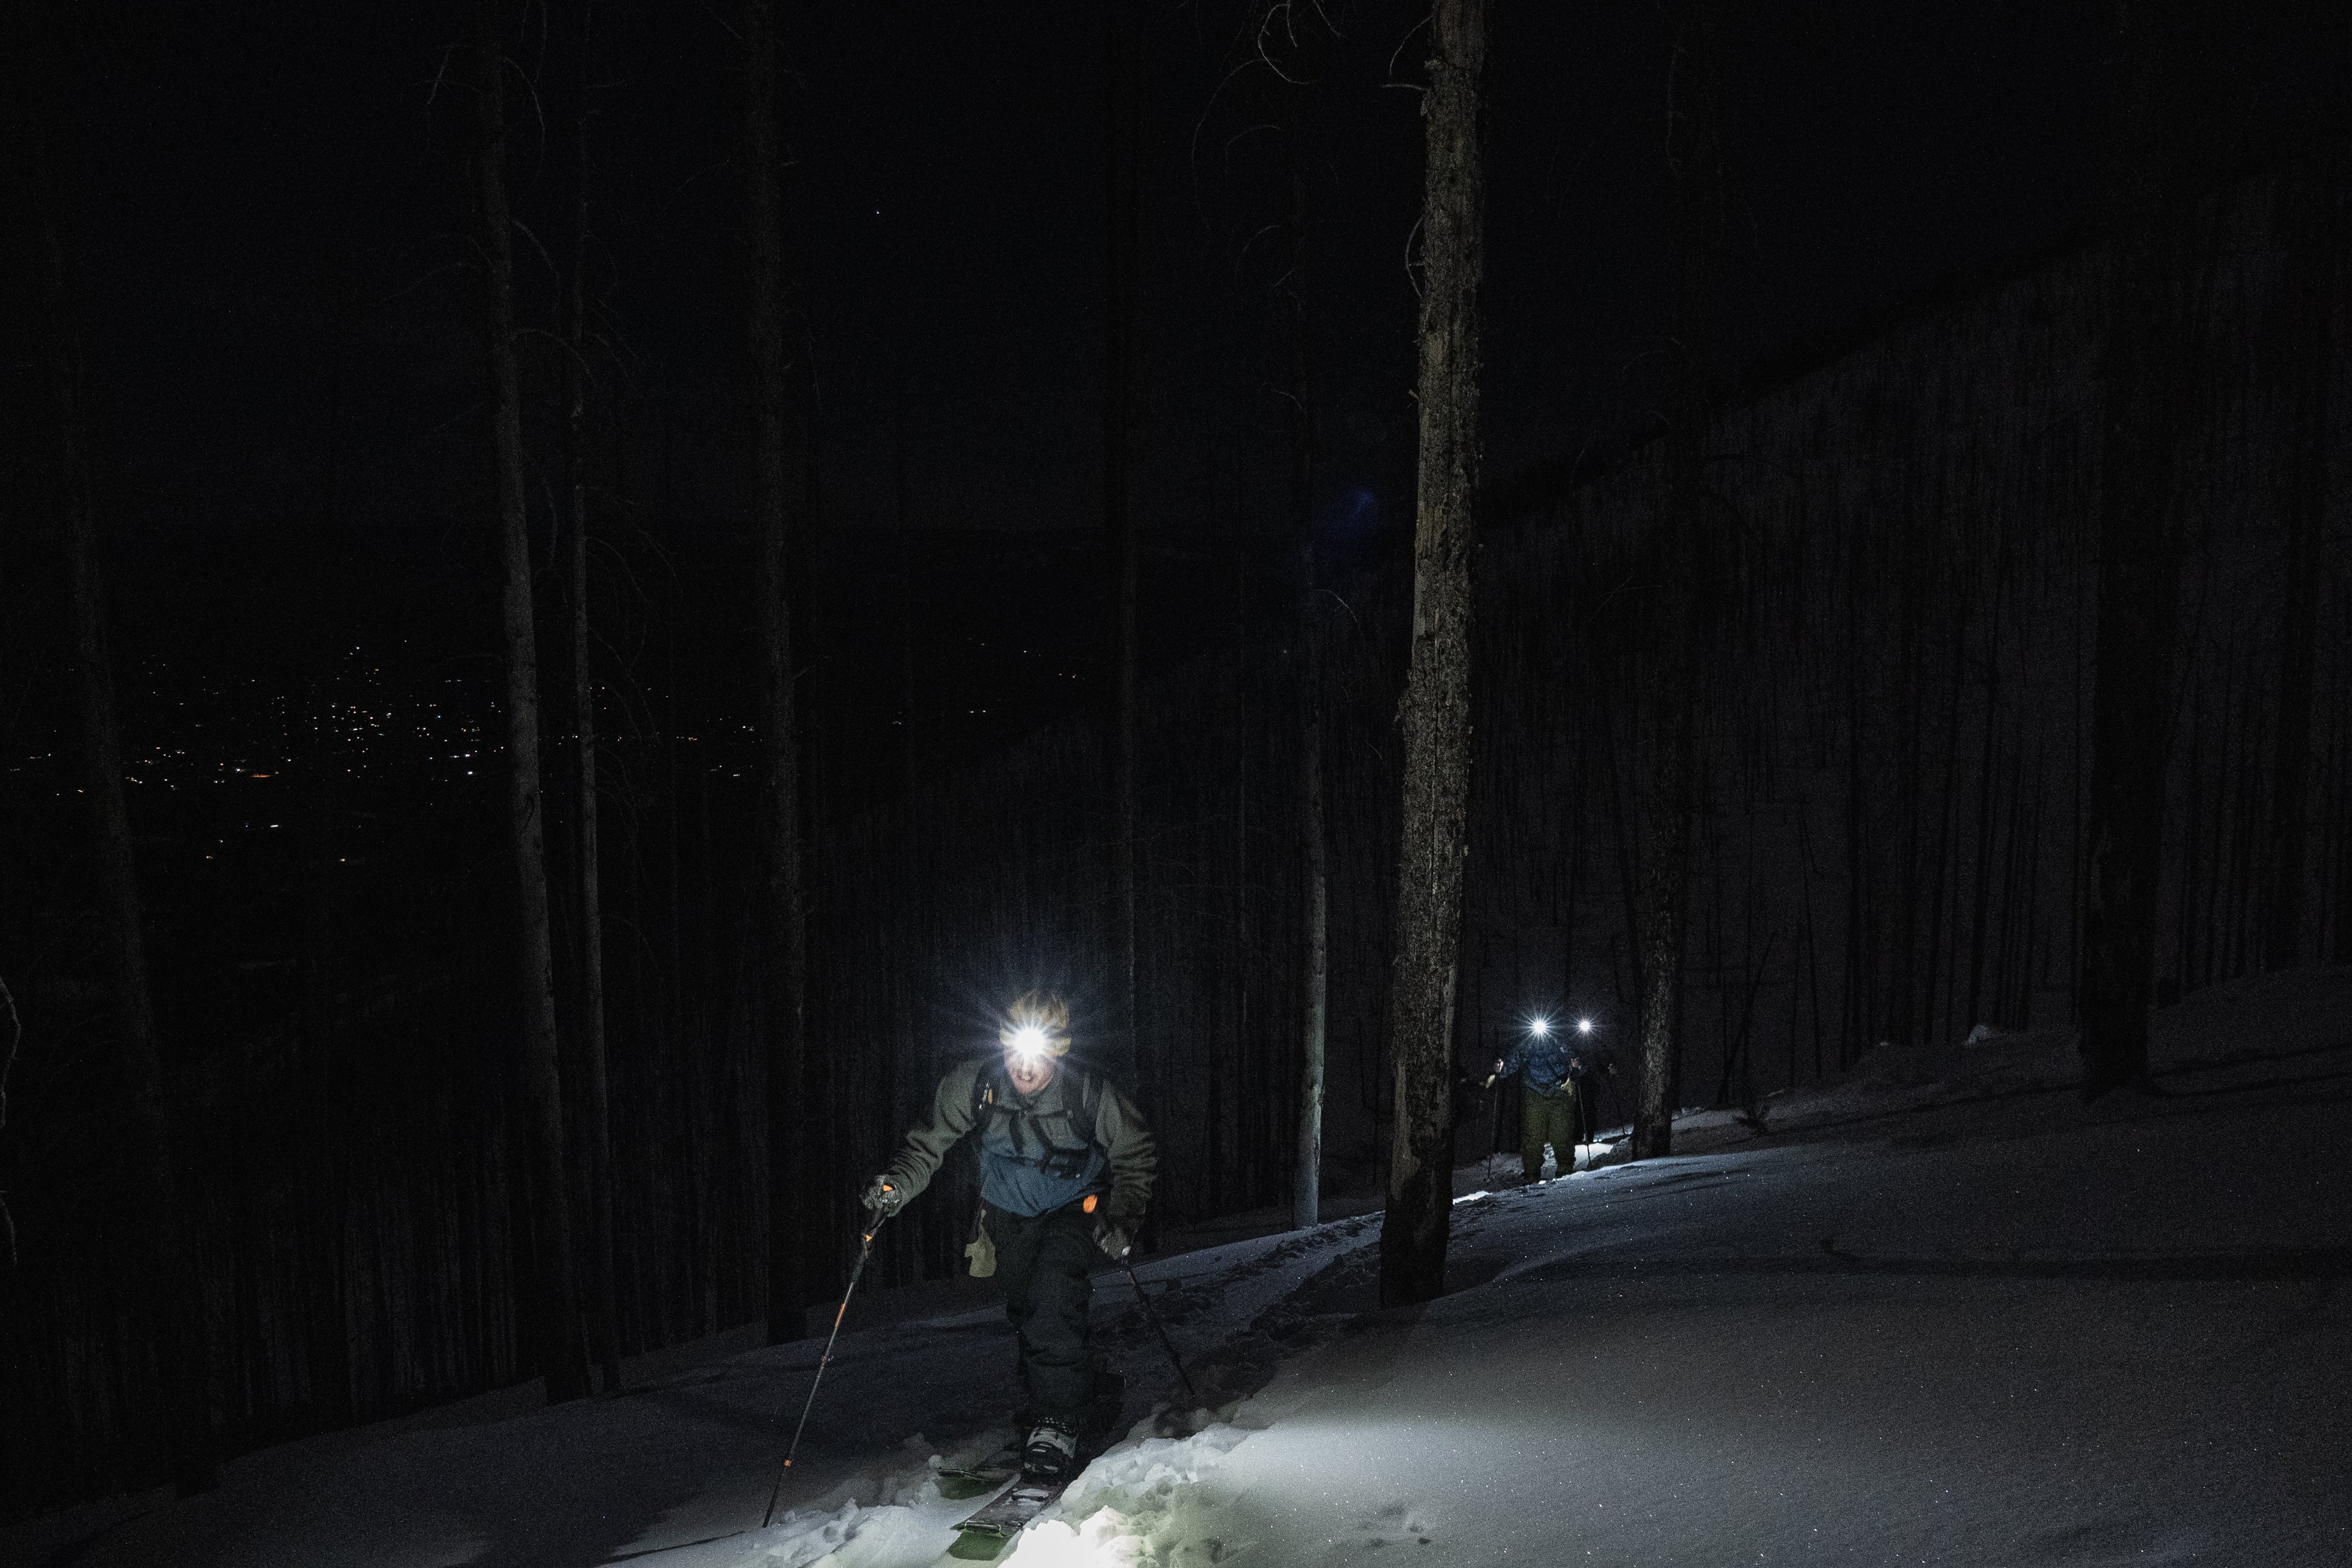 SOLR: The cinematic story of light in the backcountry